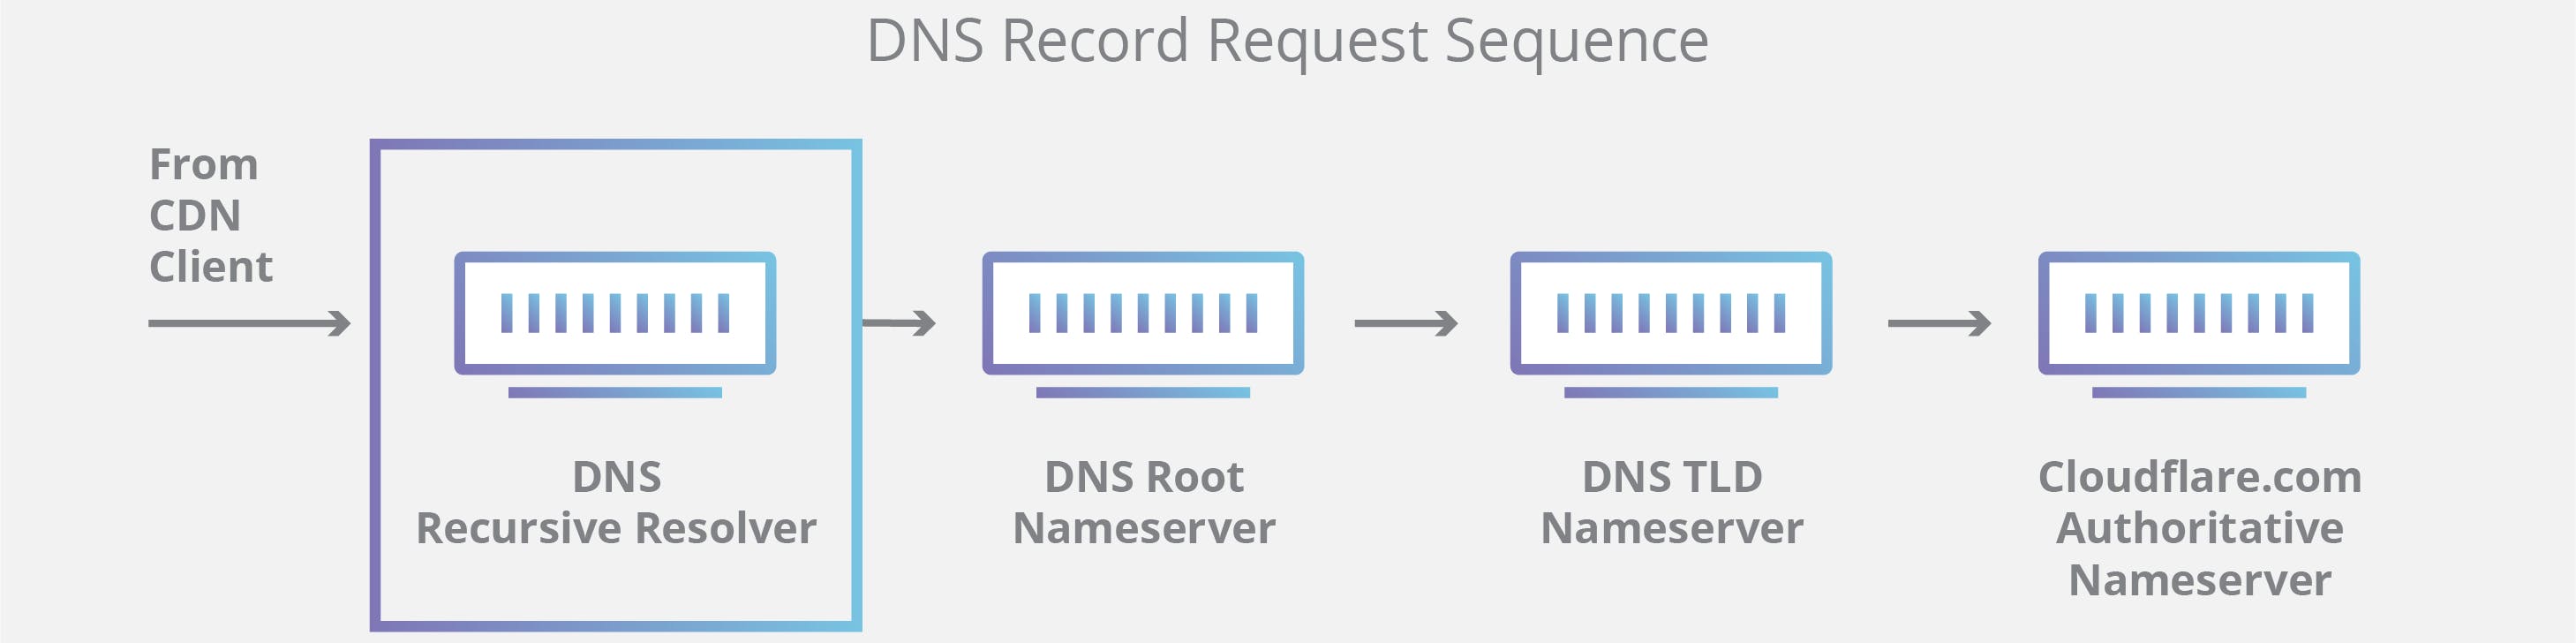 dns-record-request-sequence-1.webp